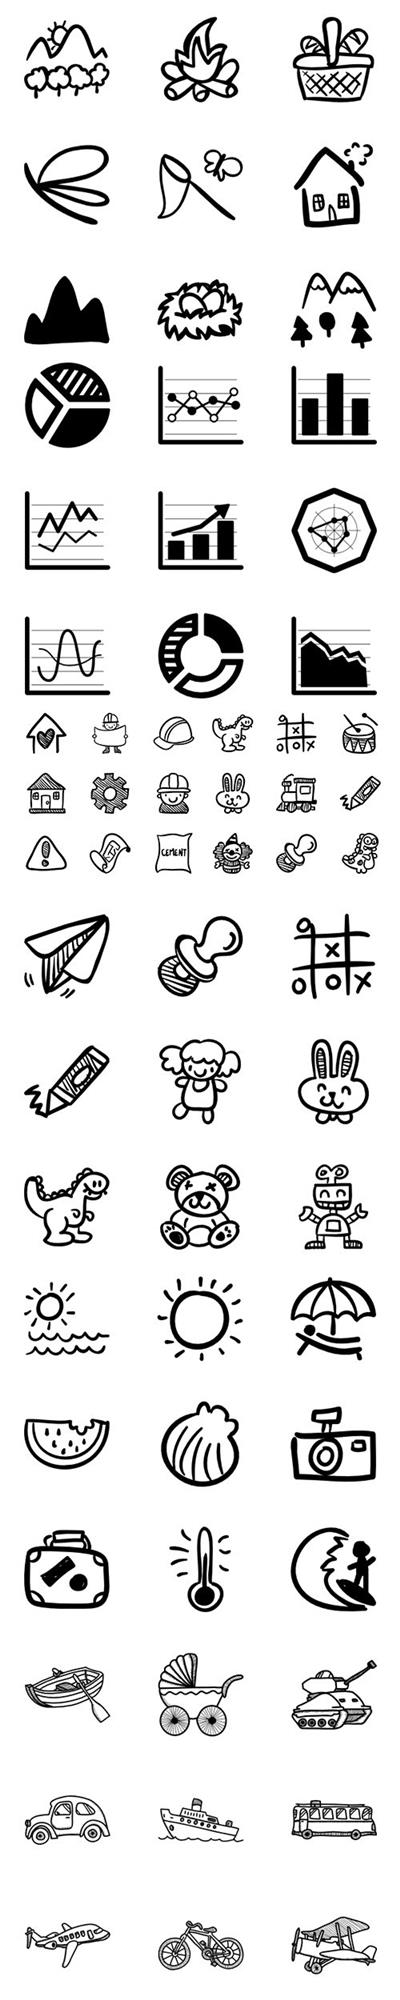 430+ Hand Drawn Detailed Vector Icons Set